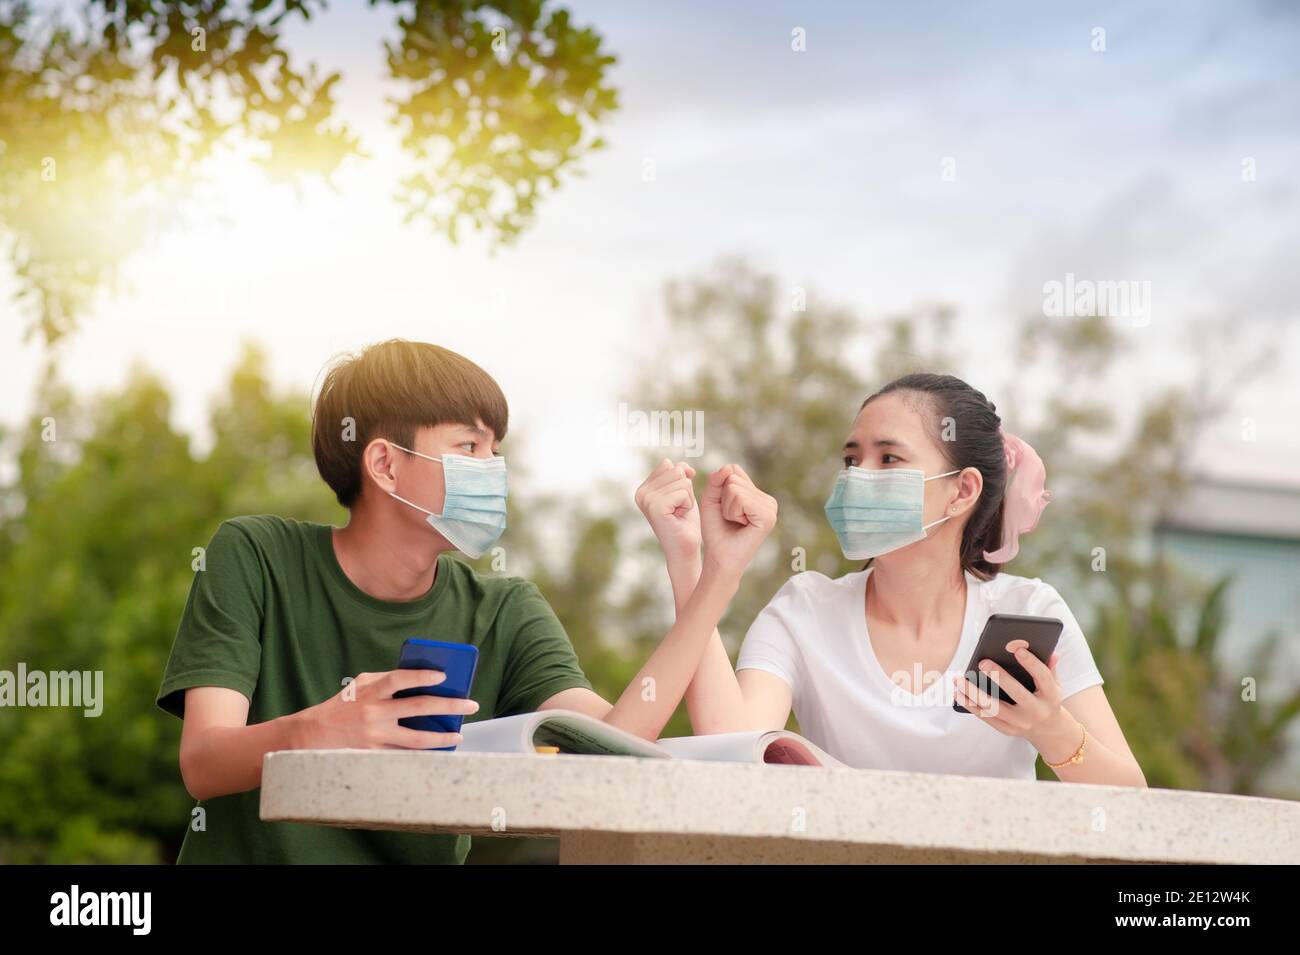 Boy and Girl in face mask new normal shake hand elbow keep social distancing protect coronavirus covid 19 Stock Photo